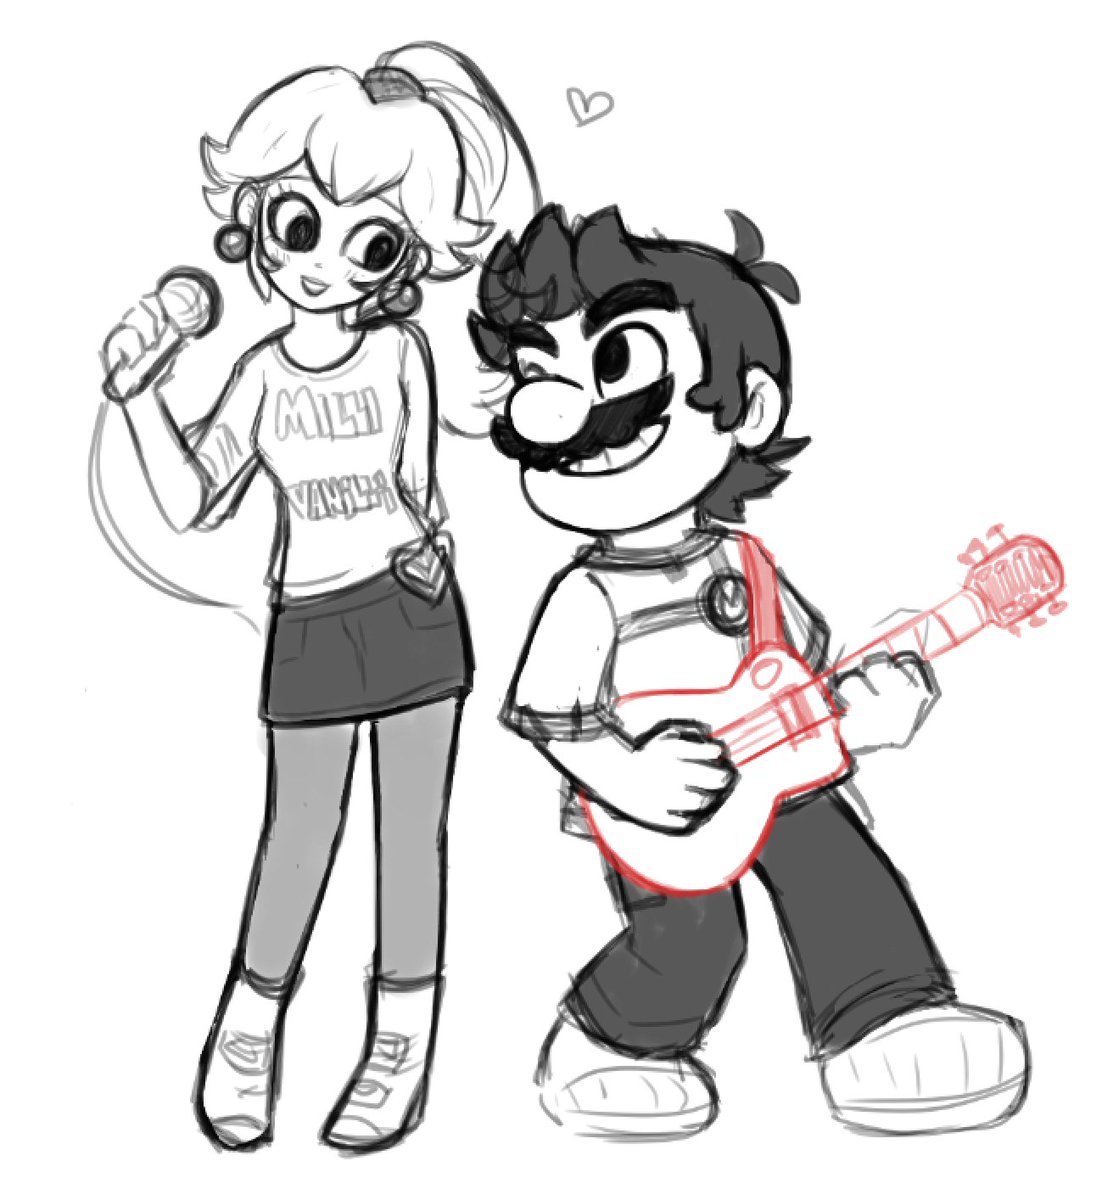 🎵Hello Again, Friend of a Friend, I knew you well🎵 Getting my motivation back! So here's a sneak peak! There's meant to be 4 people in my final vision 👀 #princesspeach #Mario #nintendo #ScottPilgrim #ScottPilgrimTakesOff #wipart #sketch